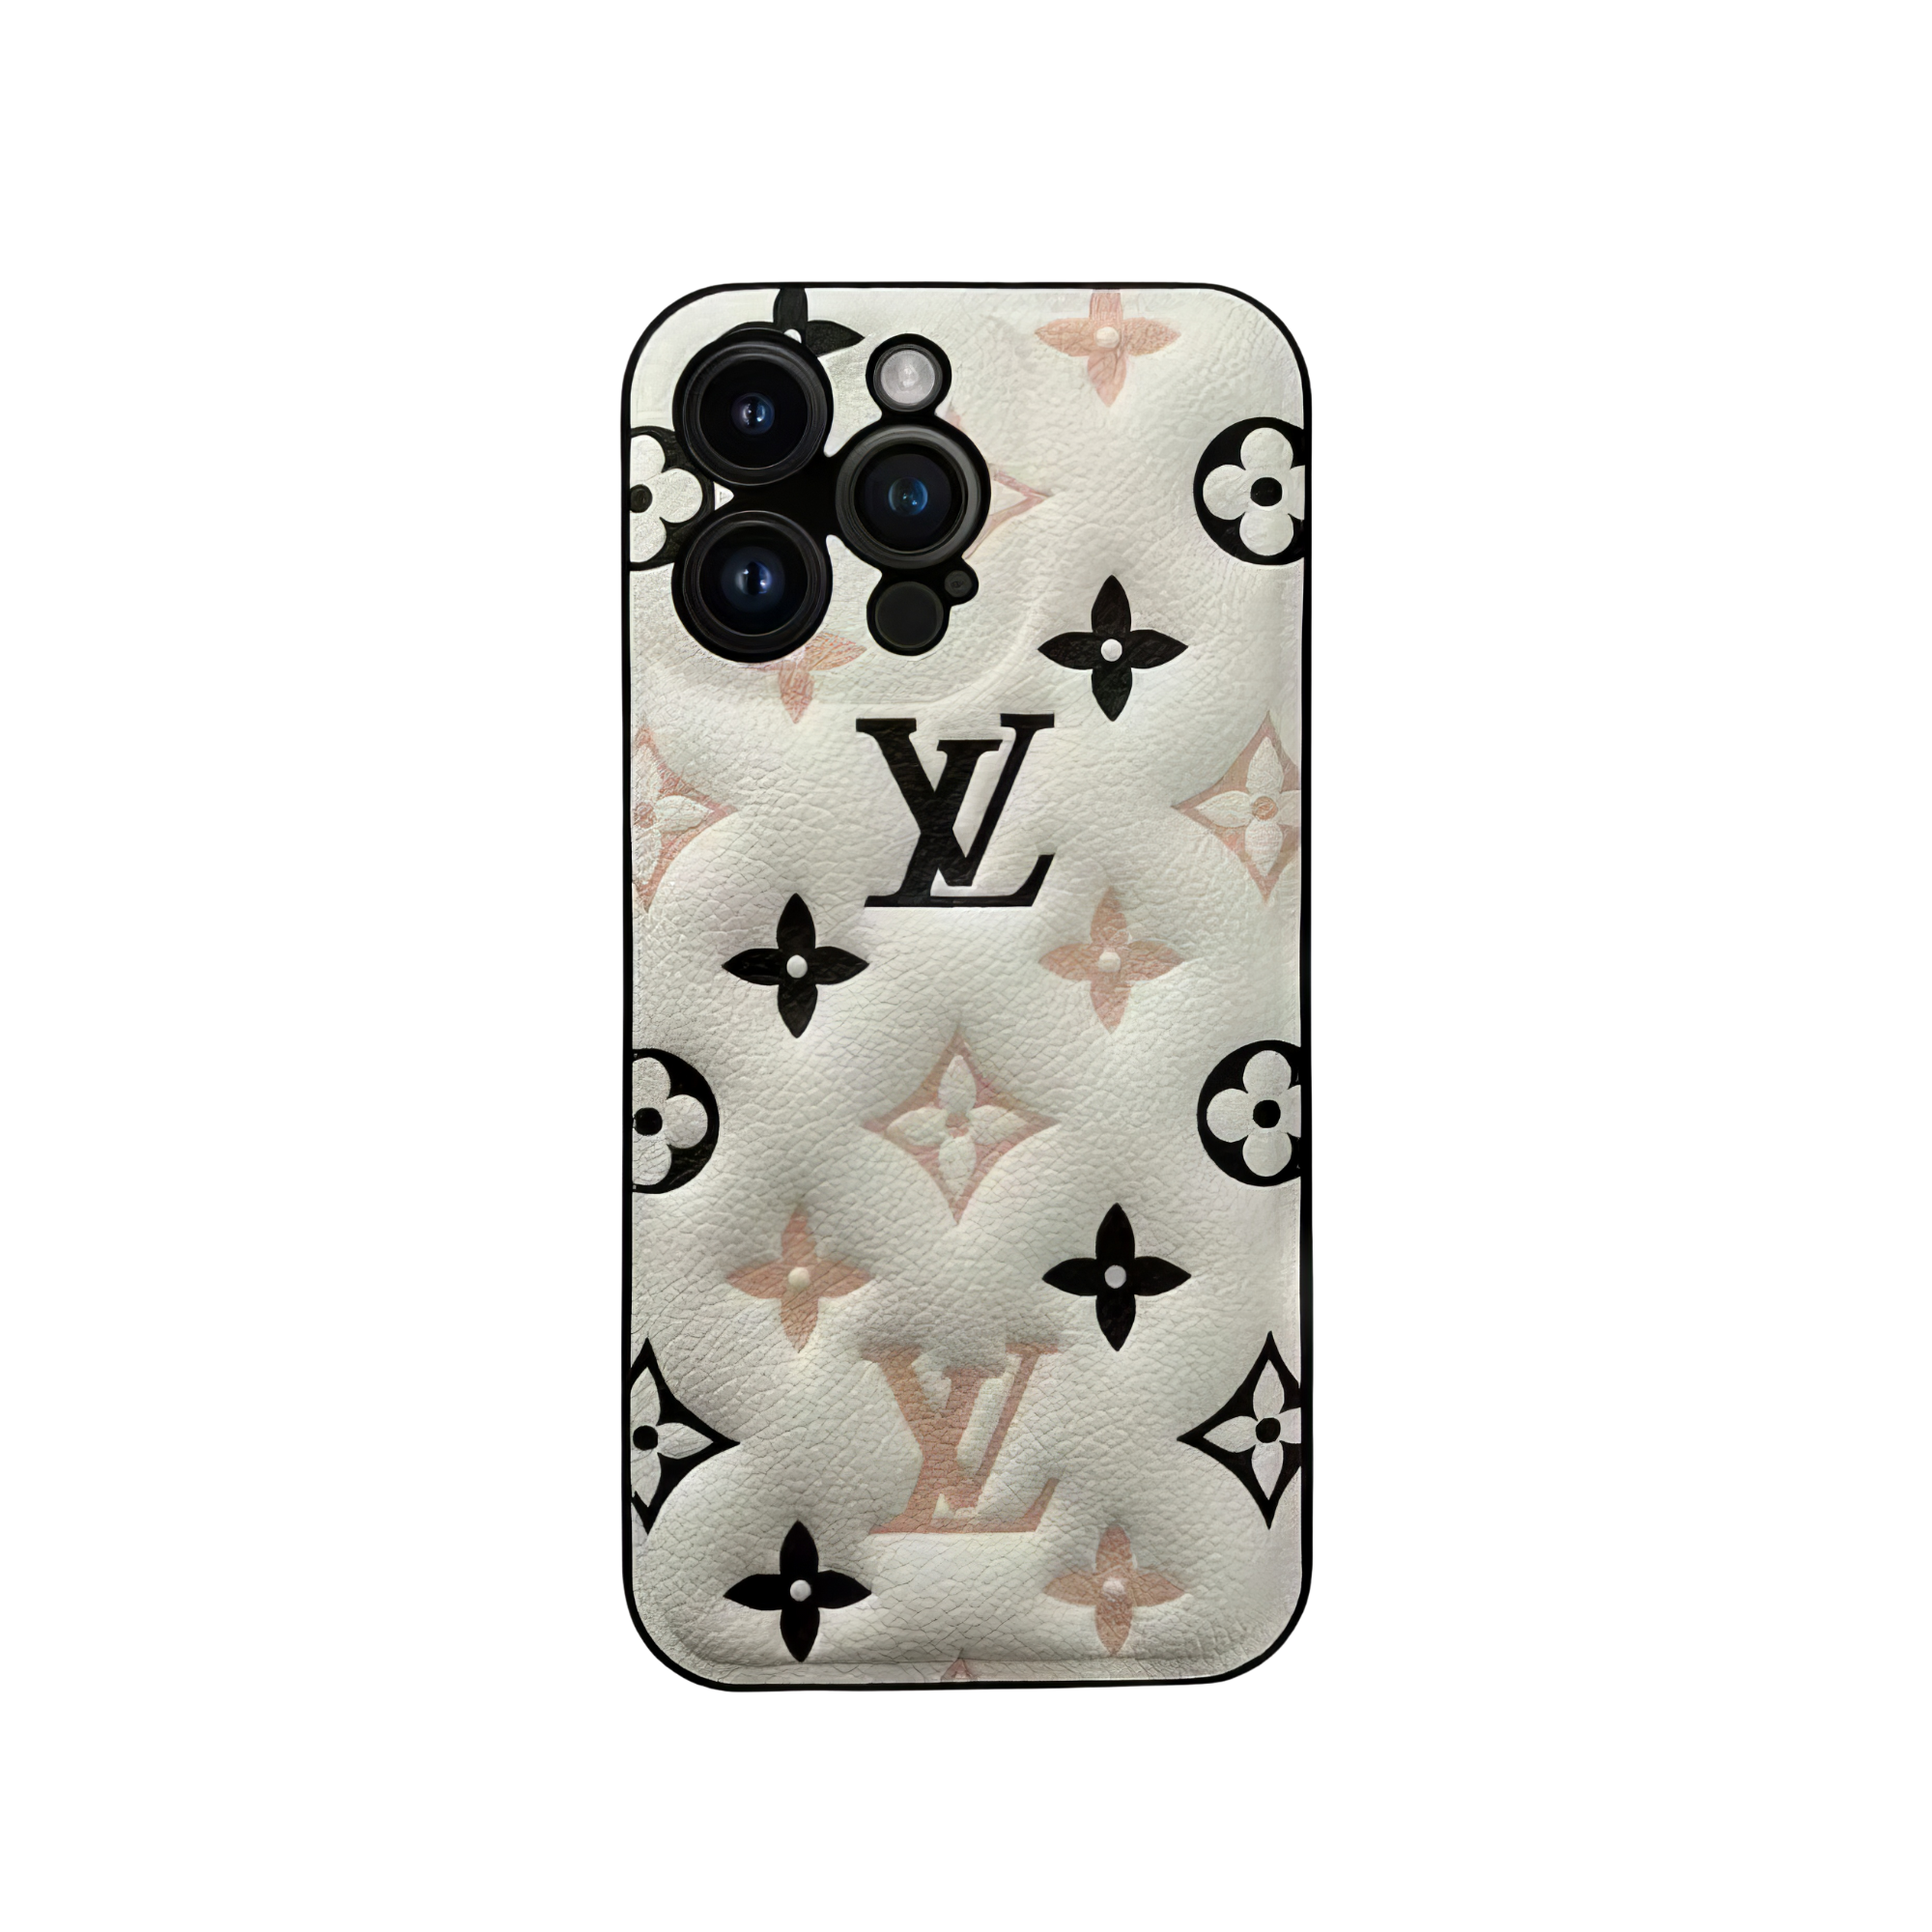 Black Louis Vuitton smartphone case with puffy design and LV logo